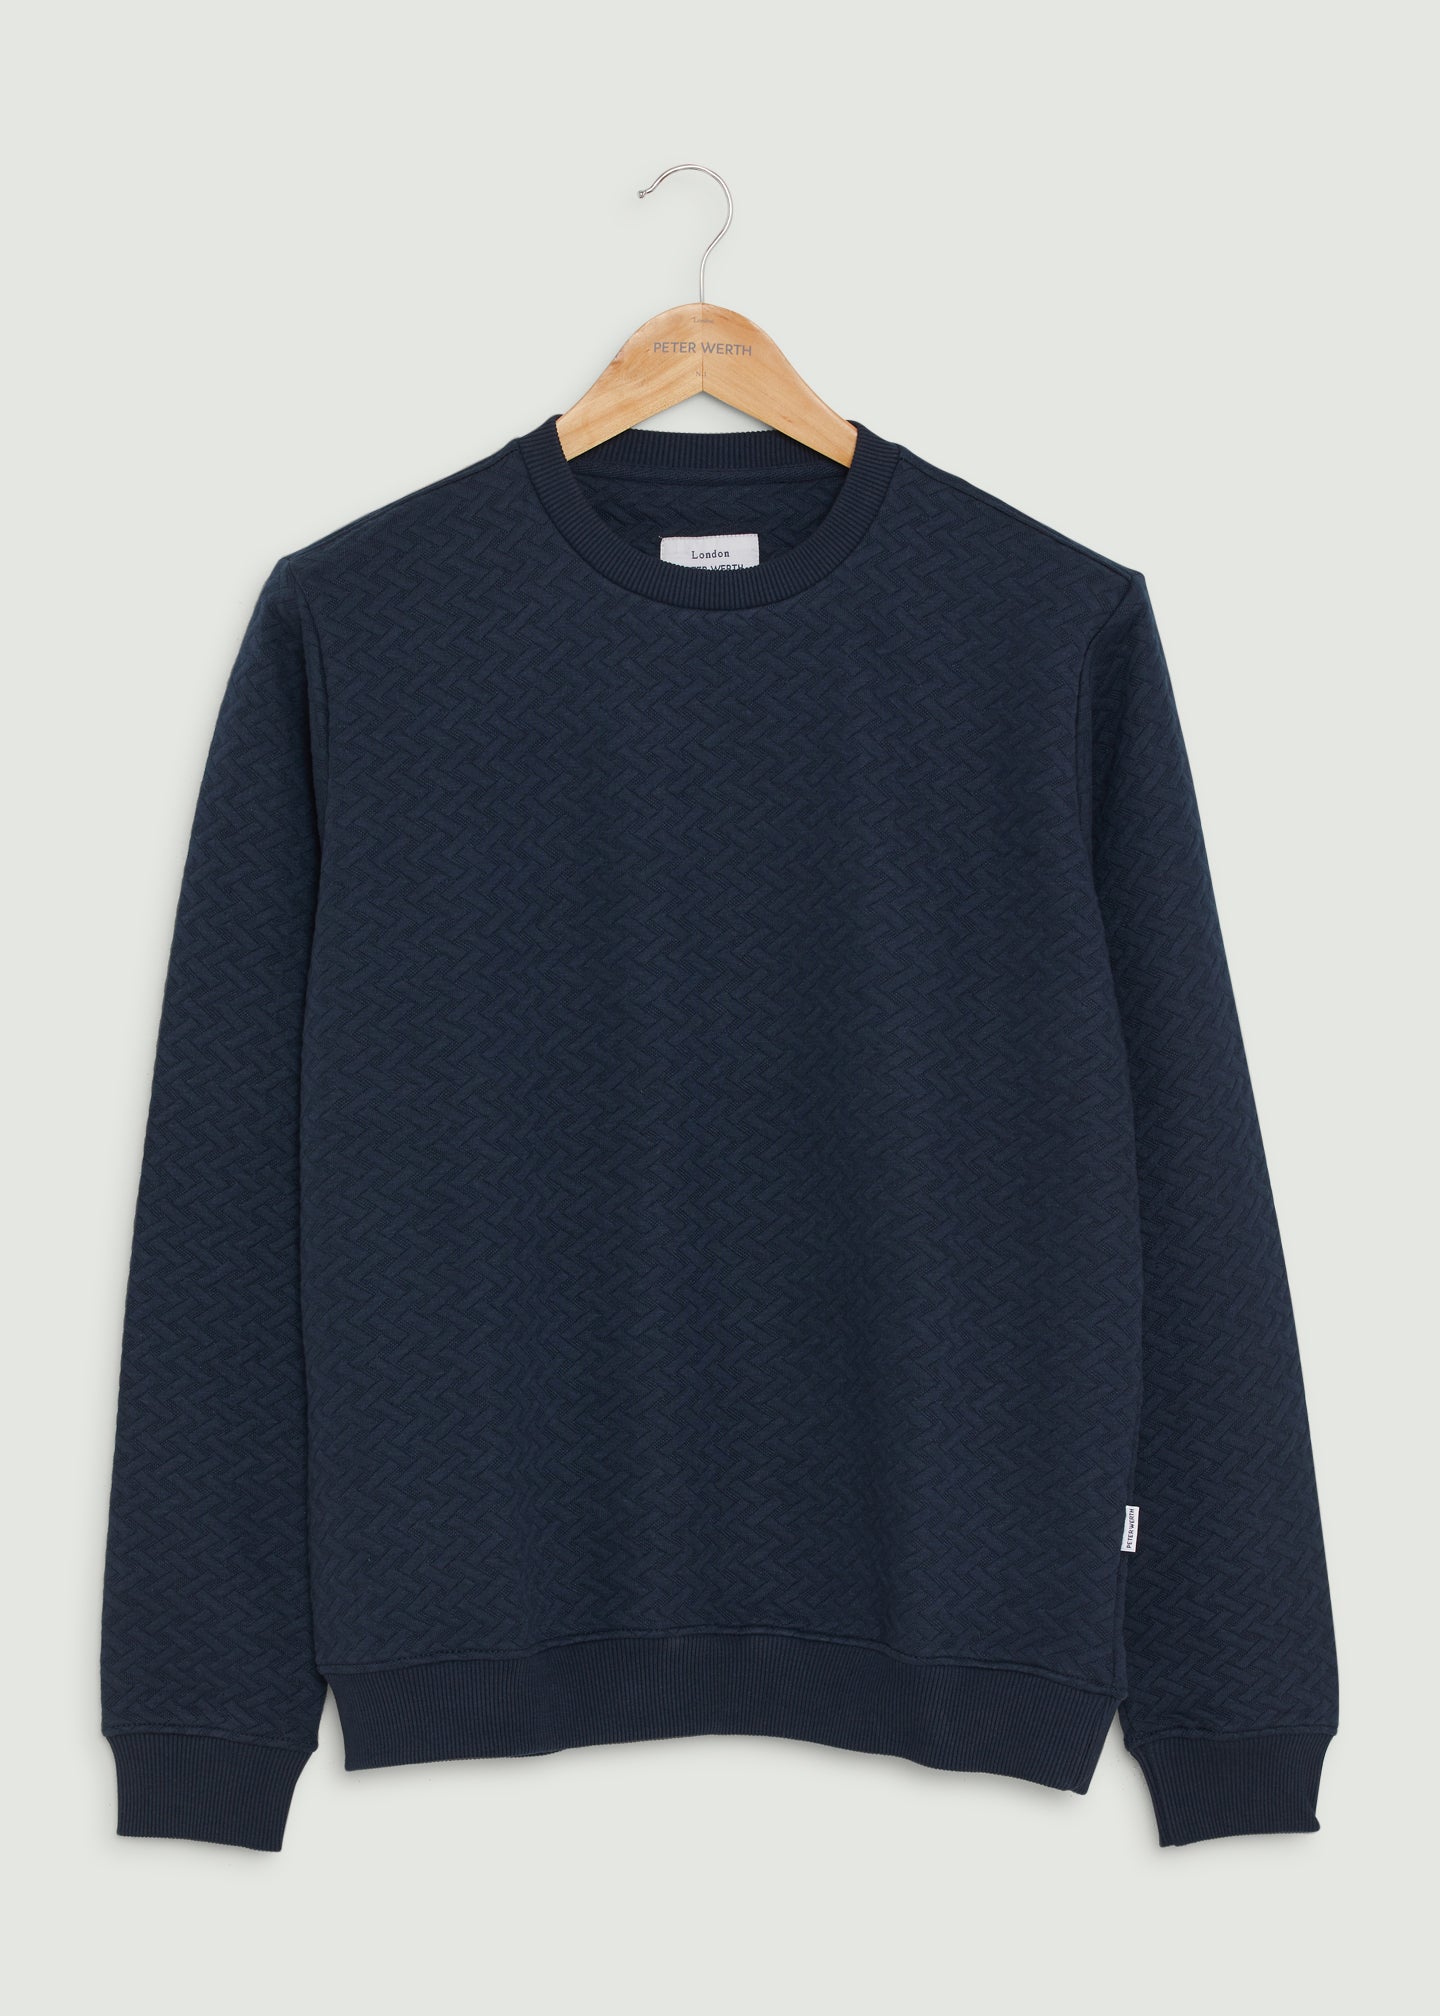 Peter Werth Knitwear & Knitted Jumpers for Men